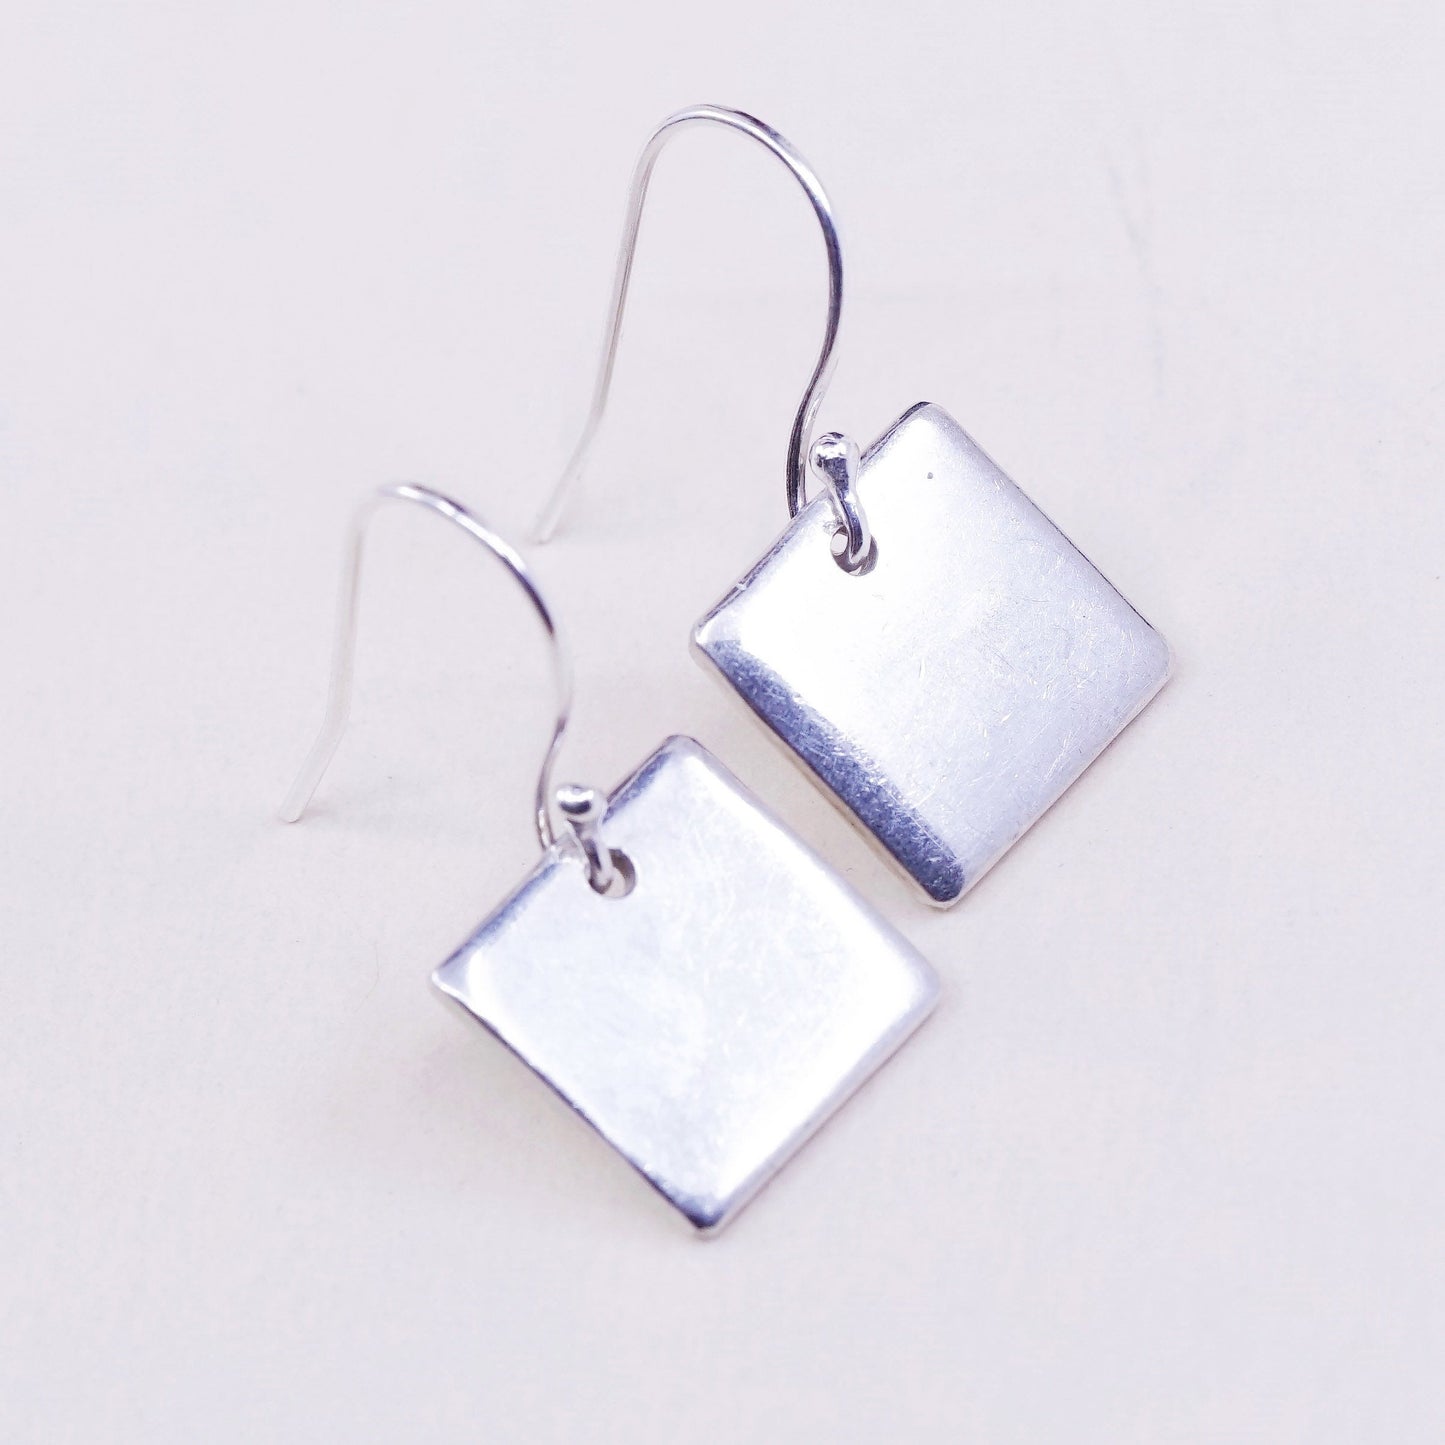 Vintage Sterling silver handmade earrings, Mexico 925 square dangle